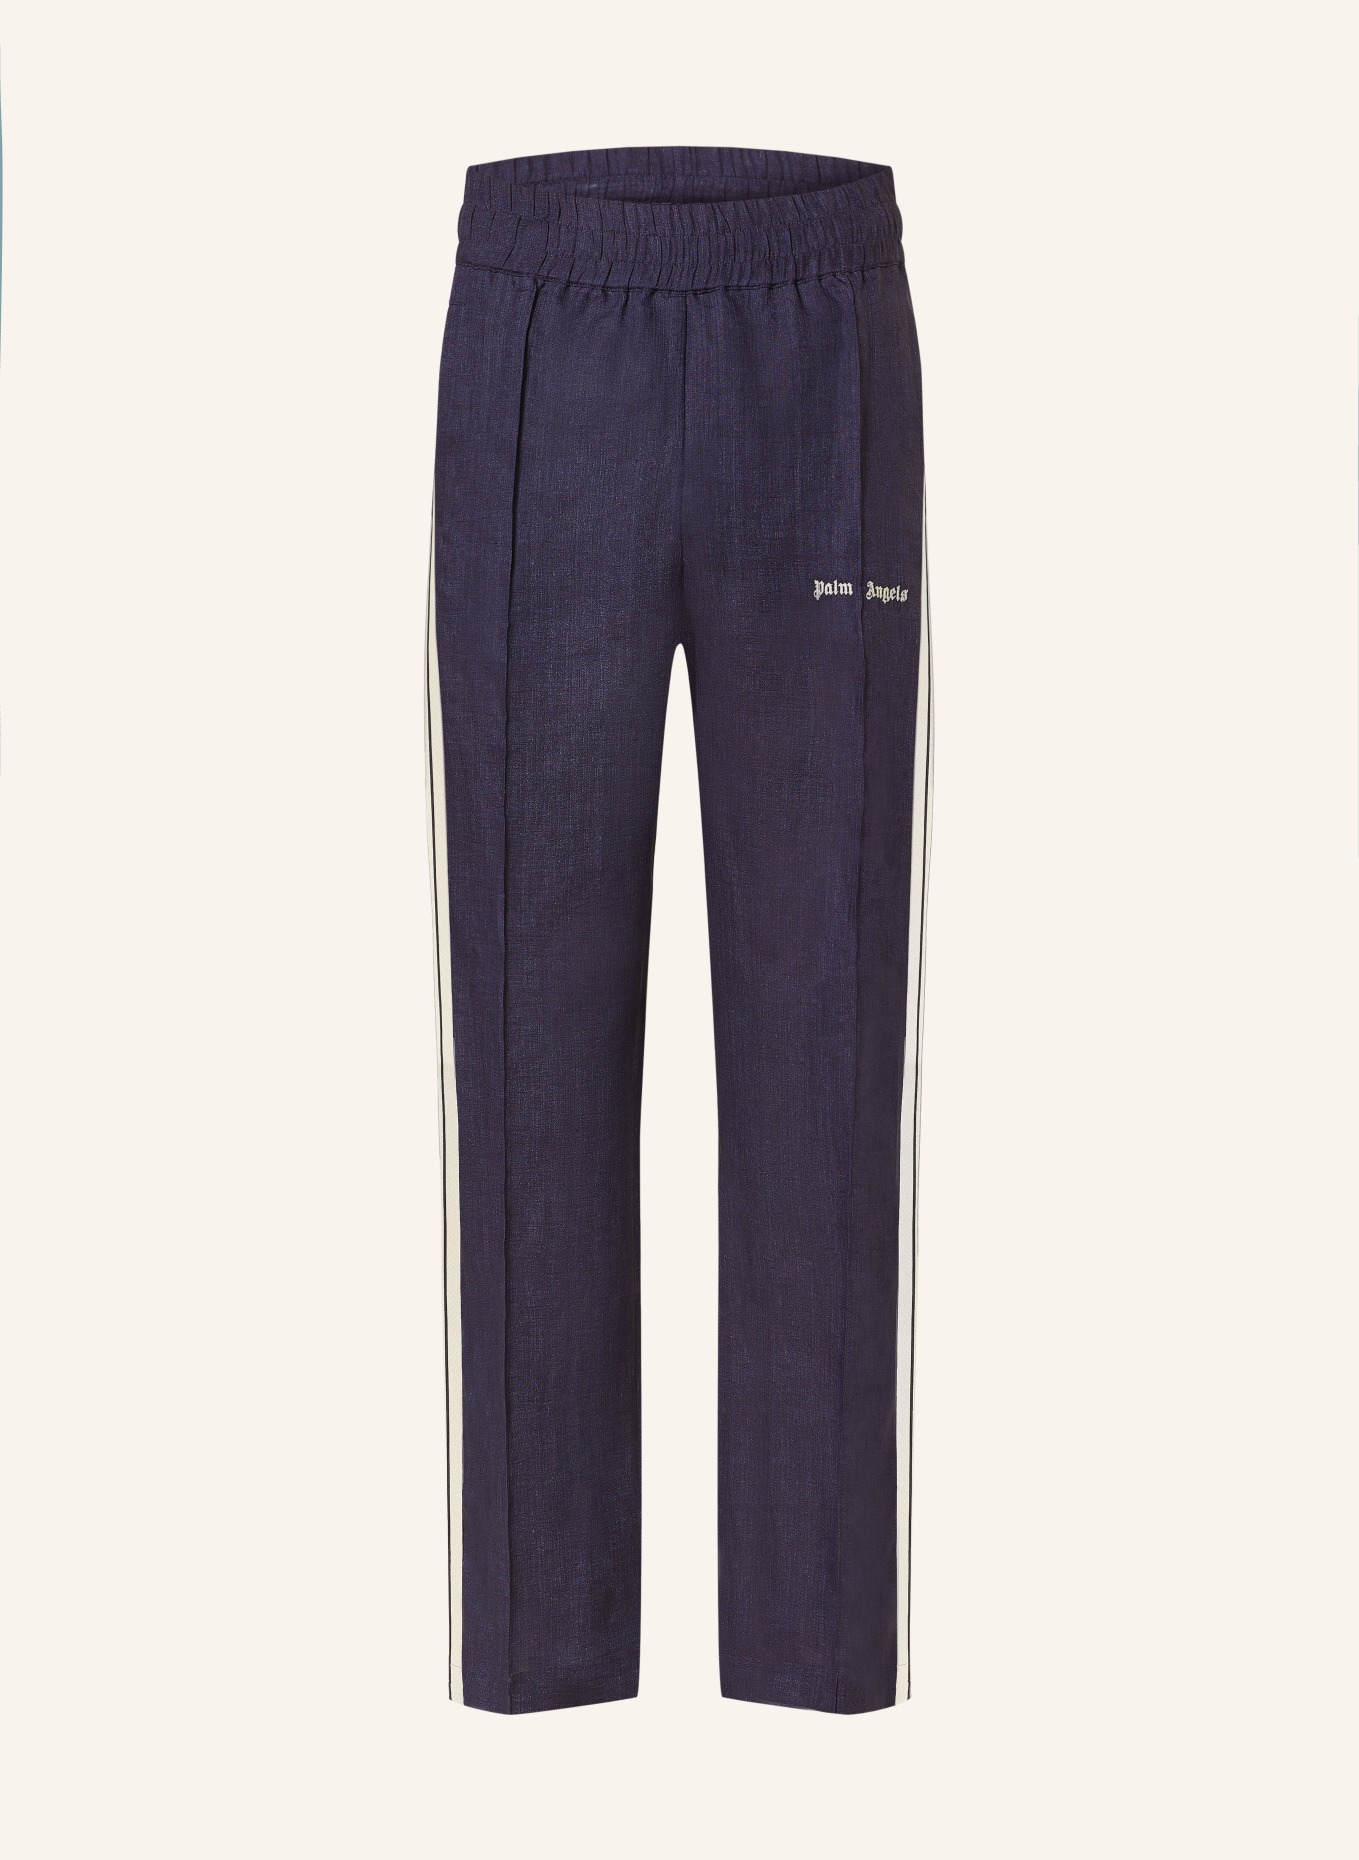 Palm Angels Linen pants in jogger style, Color: DARK BLUE (Image 1)